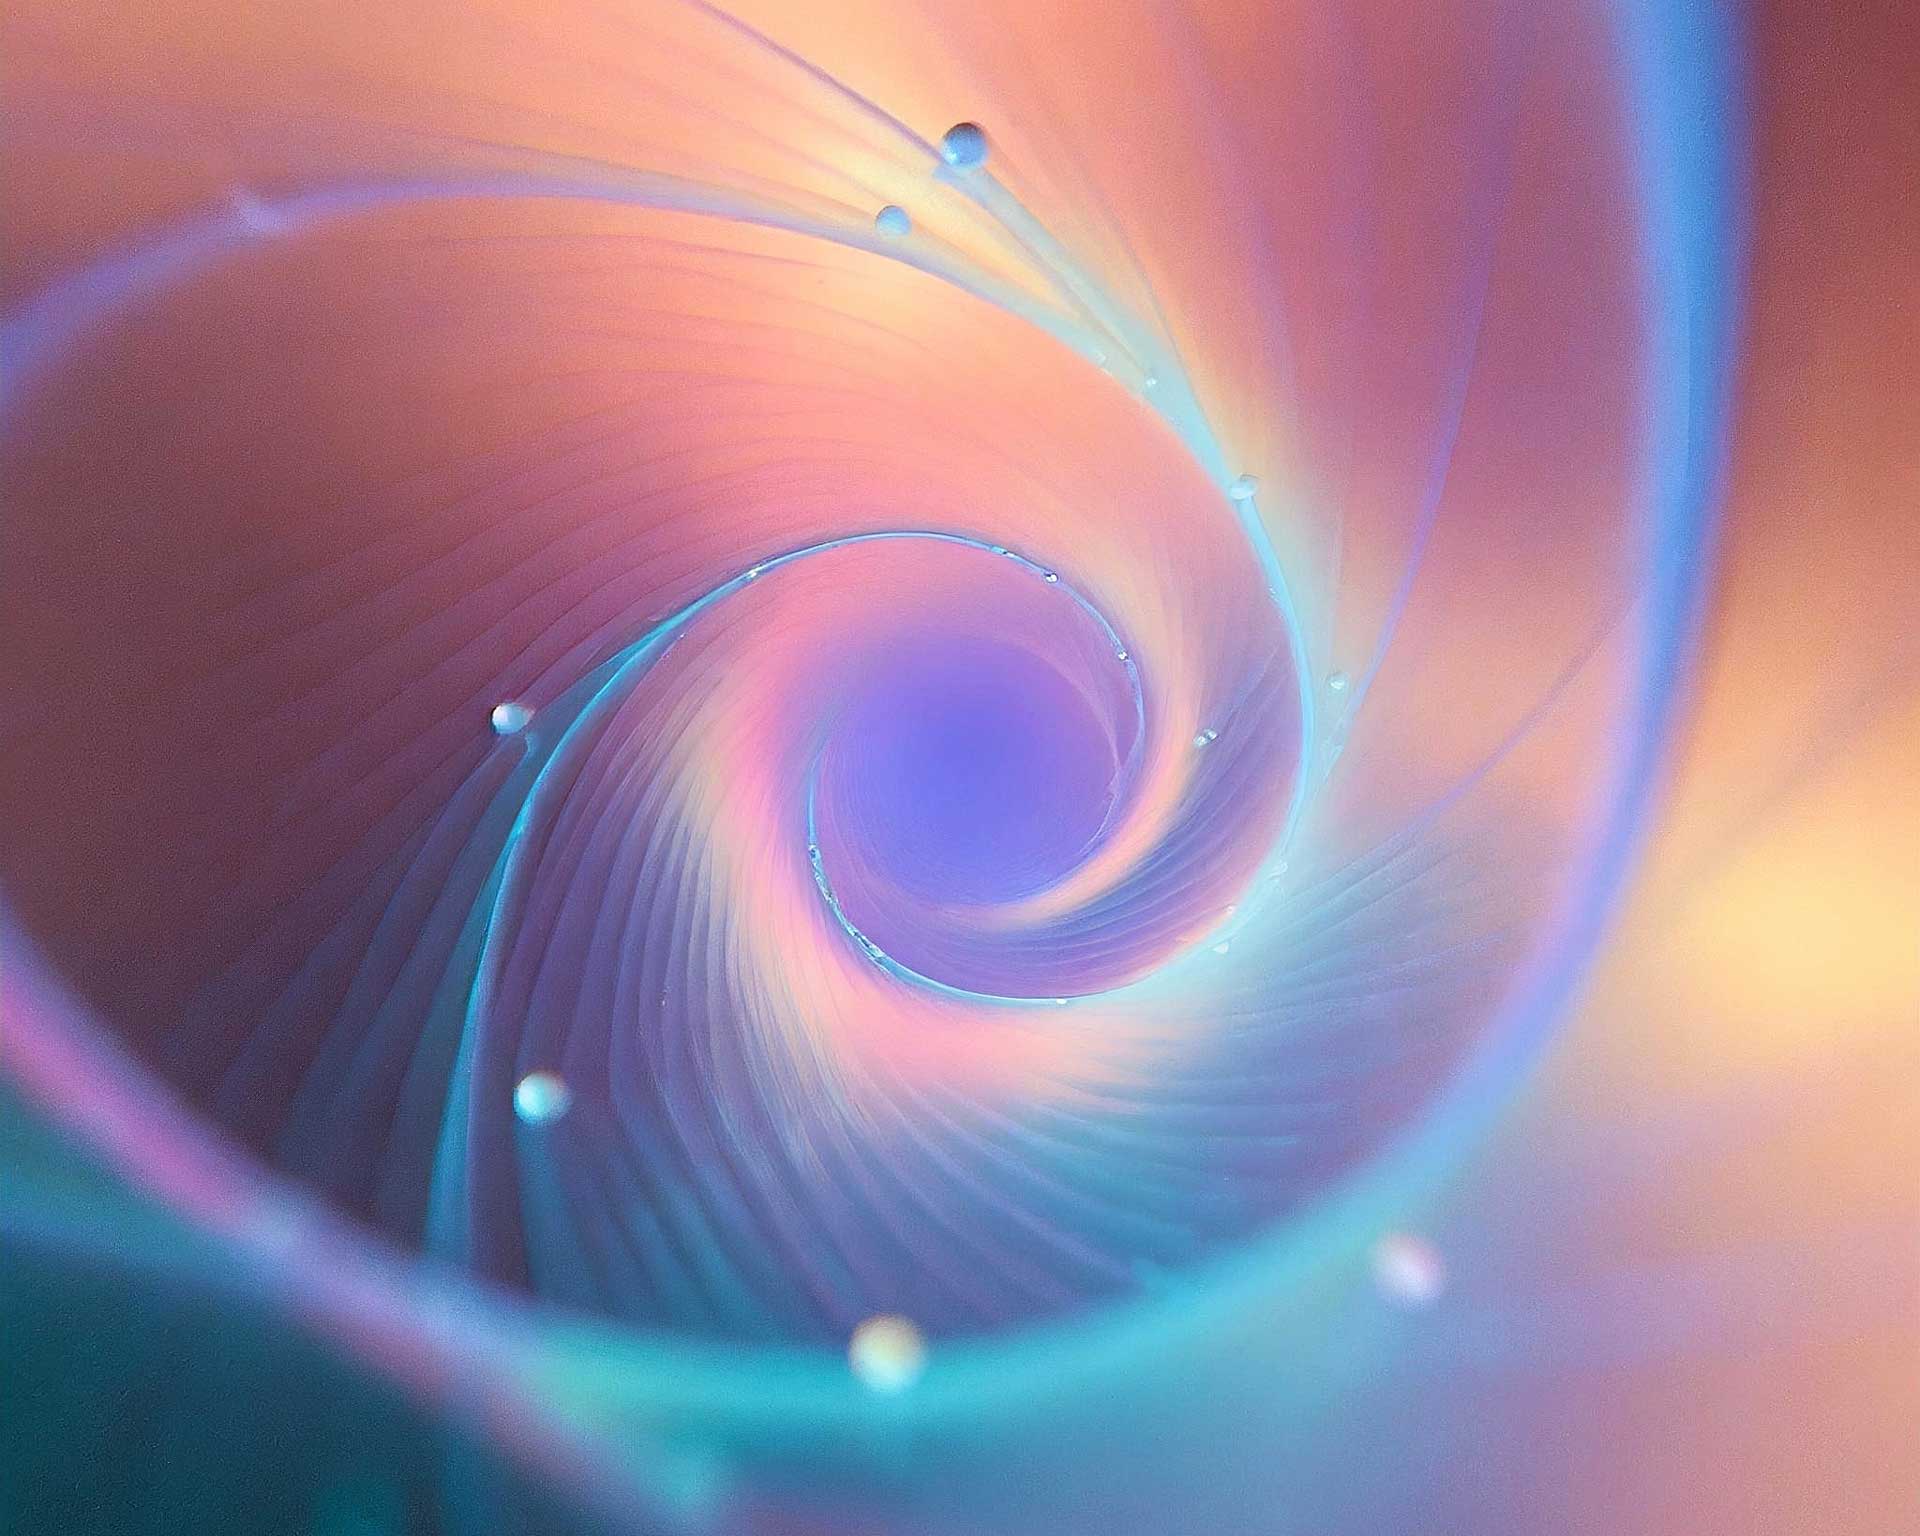 Abstract image of a vortex of colours